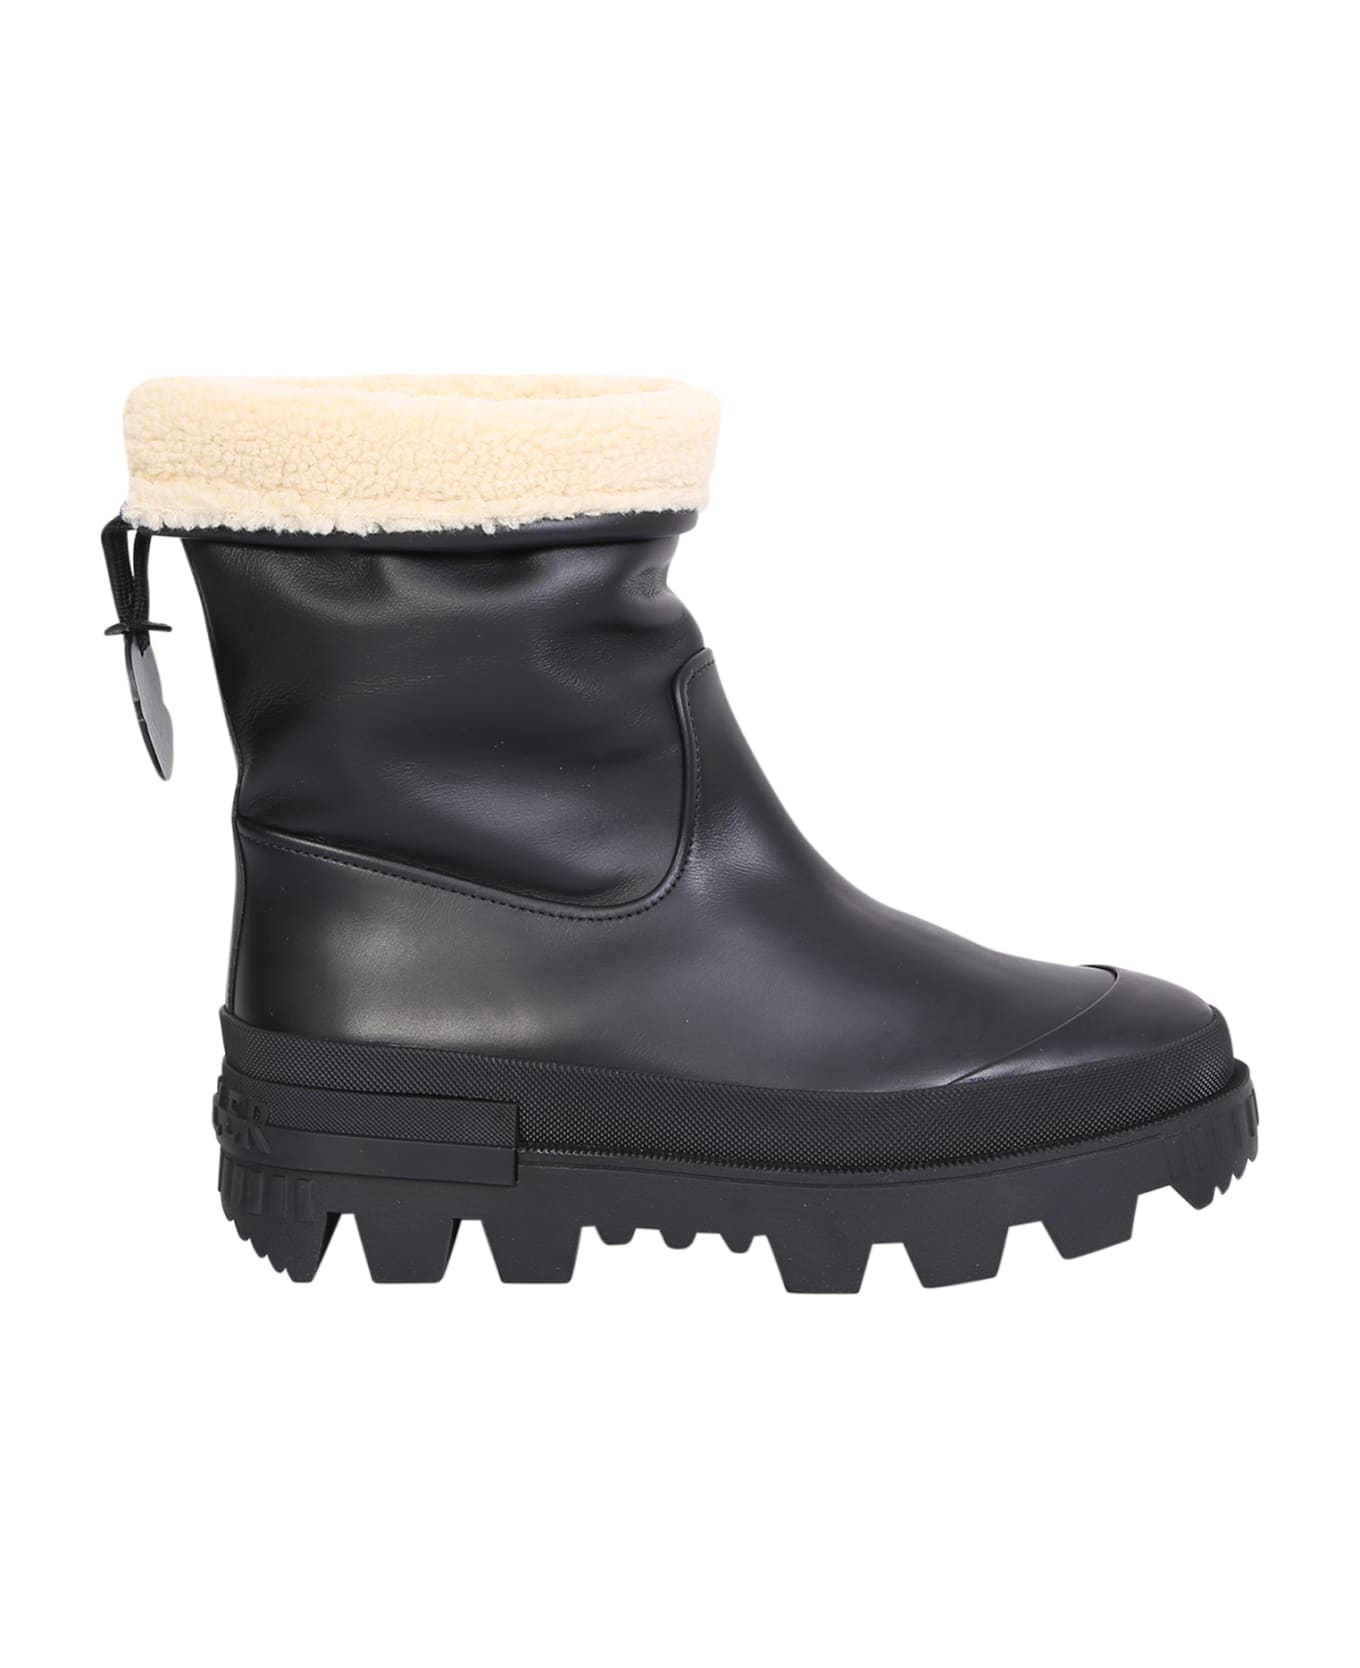 Moncler Moscova Ankle Boots - Black